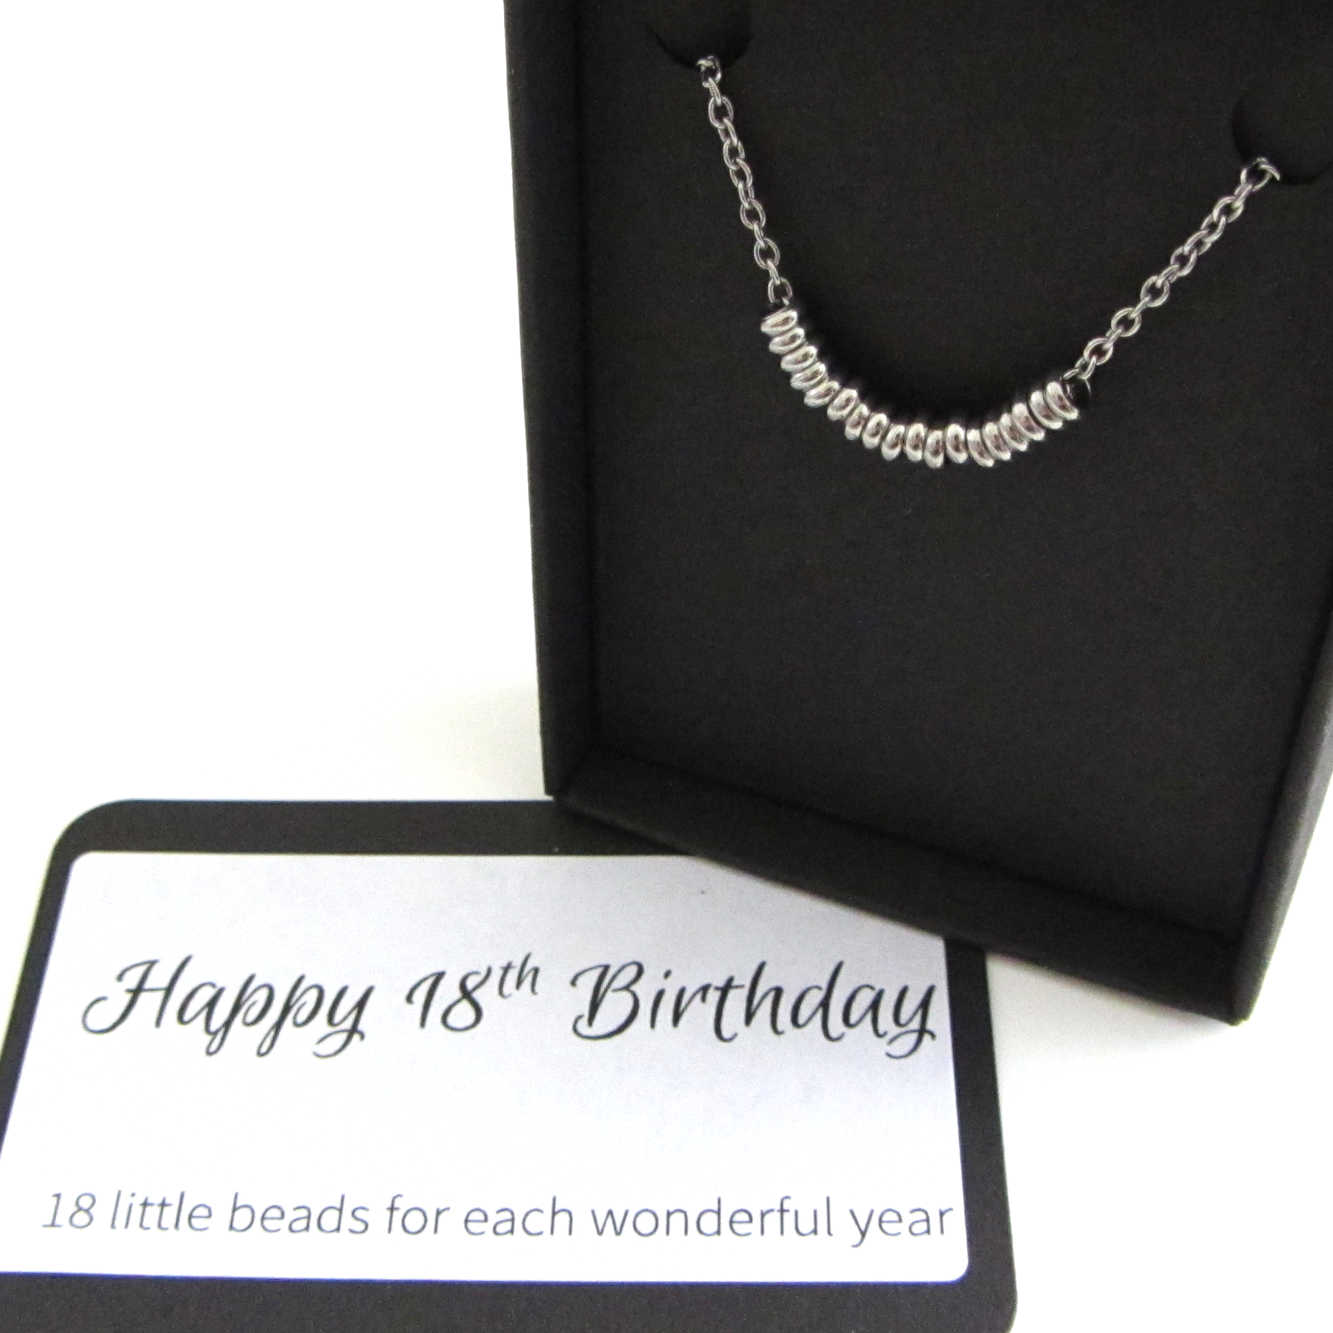 18 stainless steel beads one for each year necklace on a stainless steel chain shown in black gift box with happy 18th birthday message card